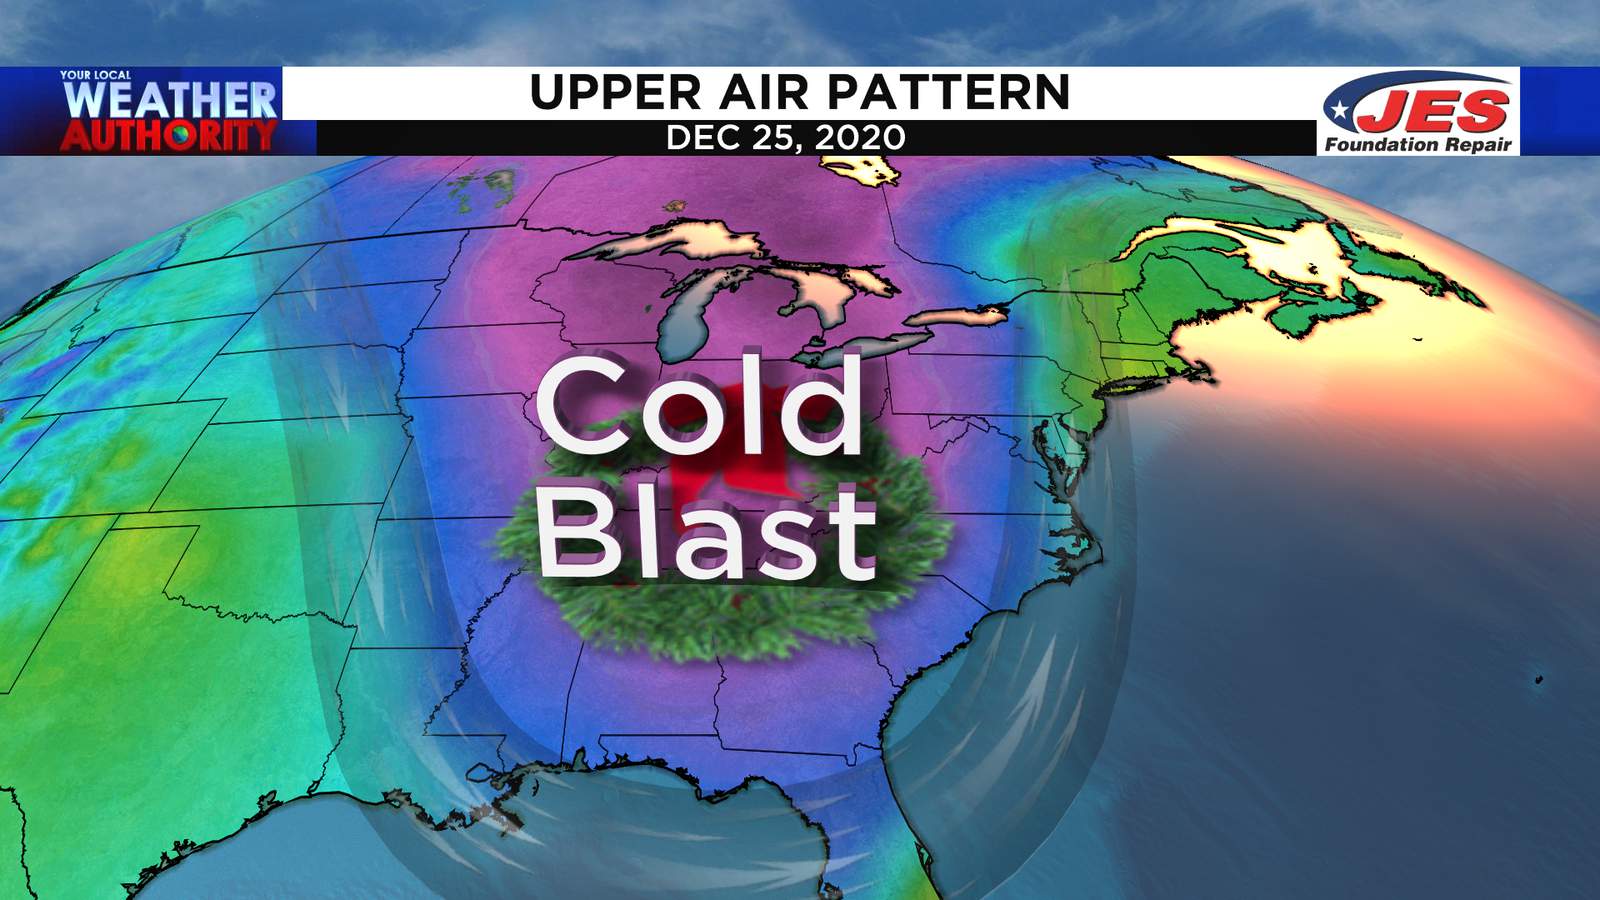 One week away! Seasonably cold weather precedes Christmas cold blast